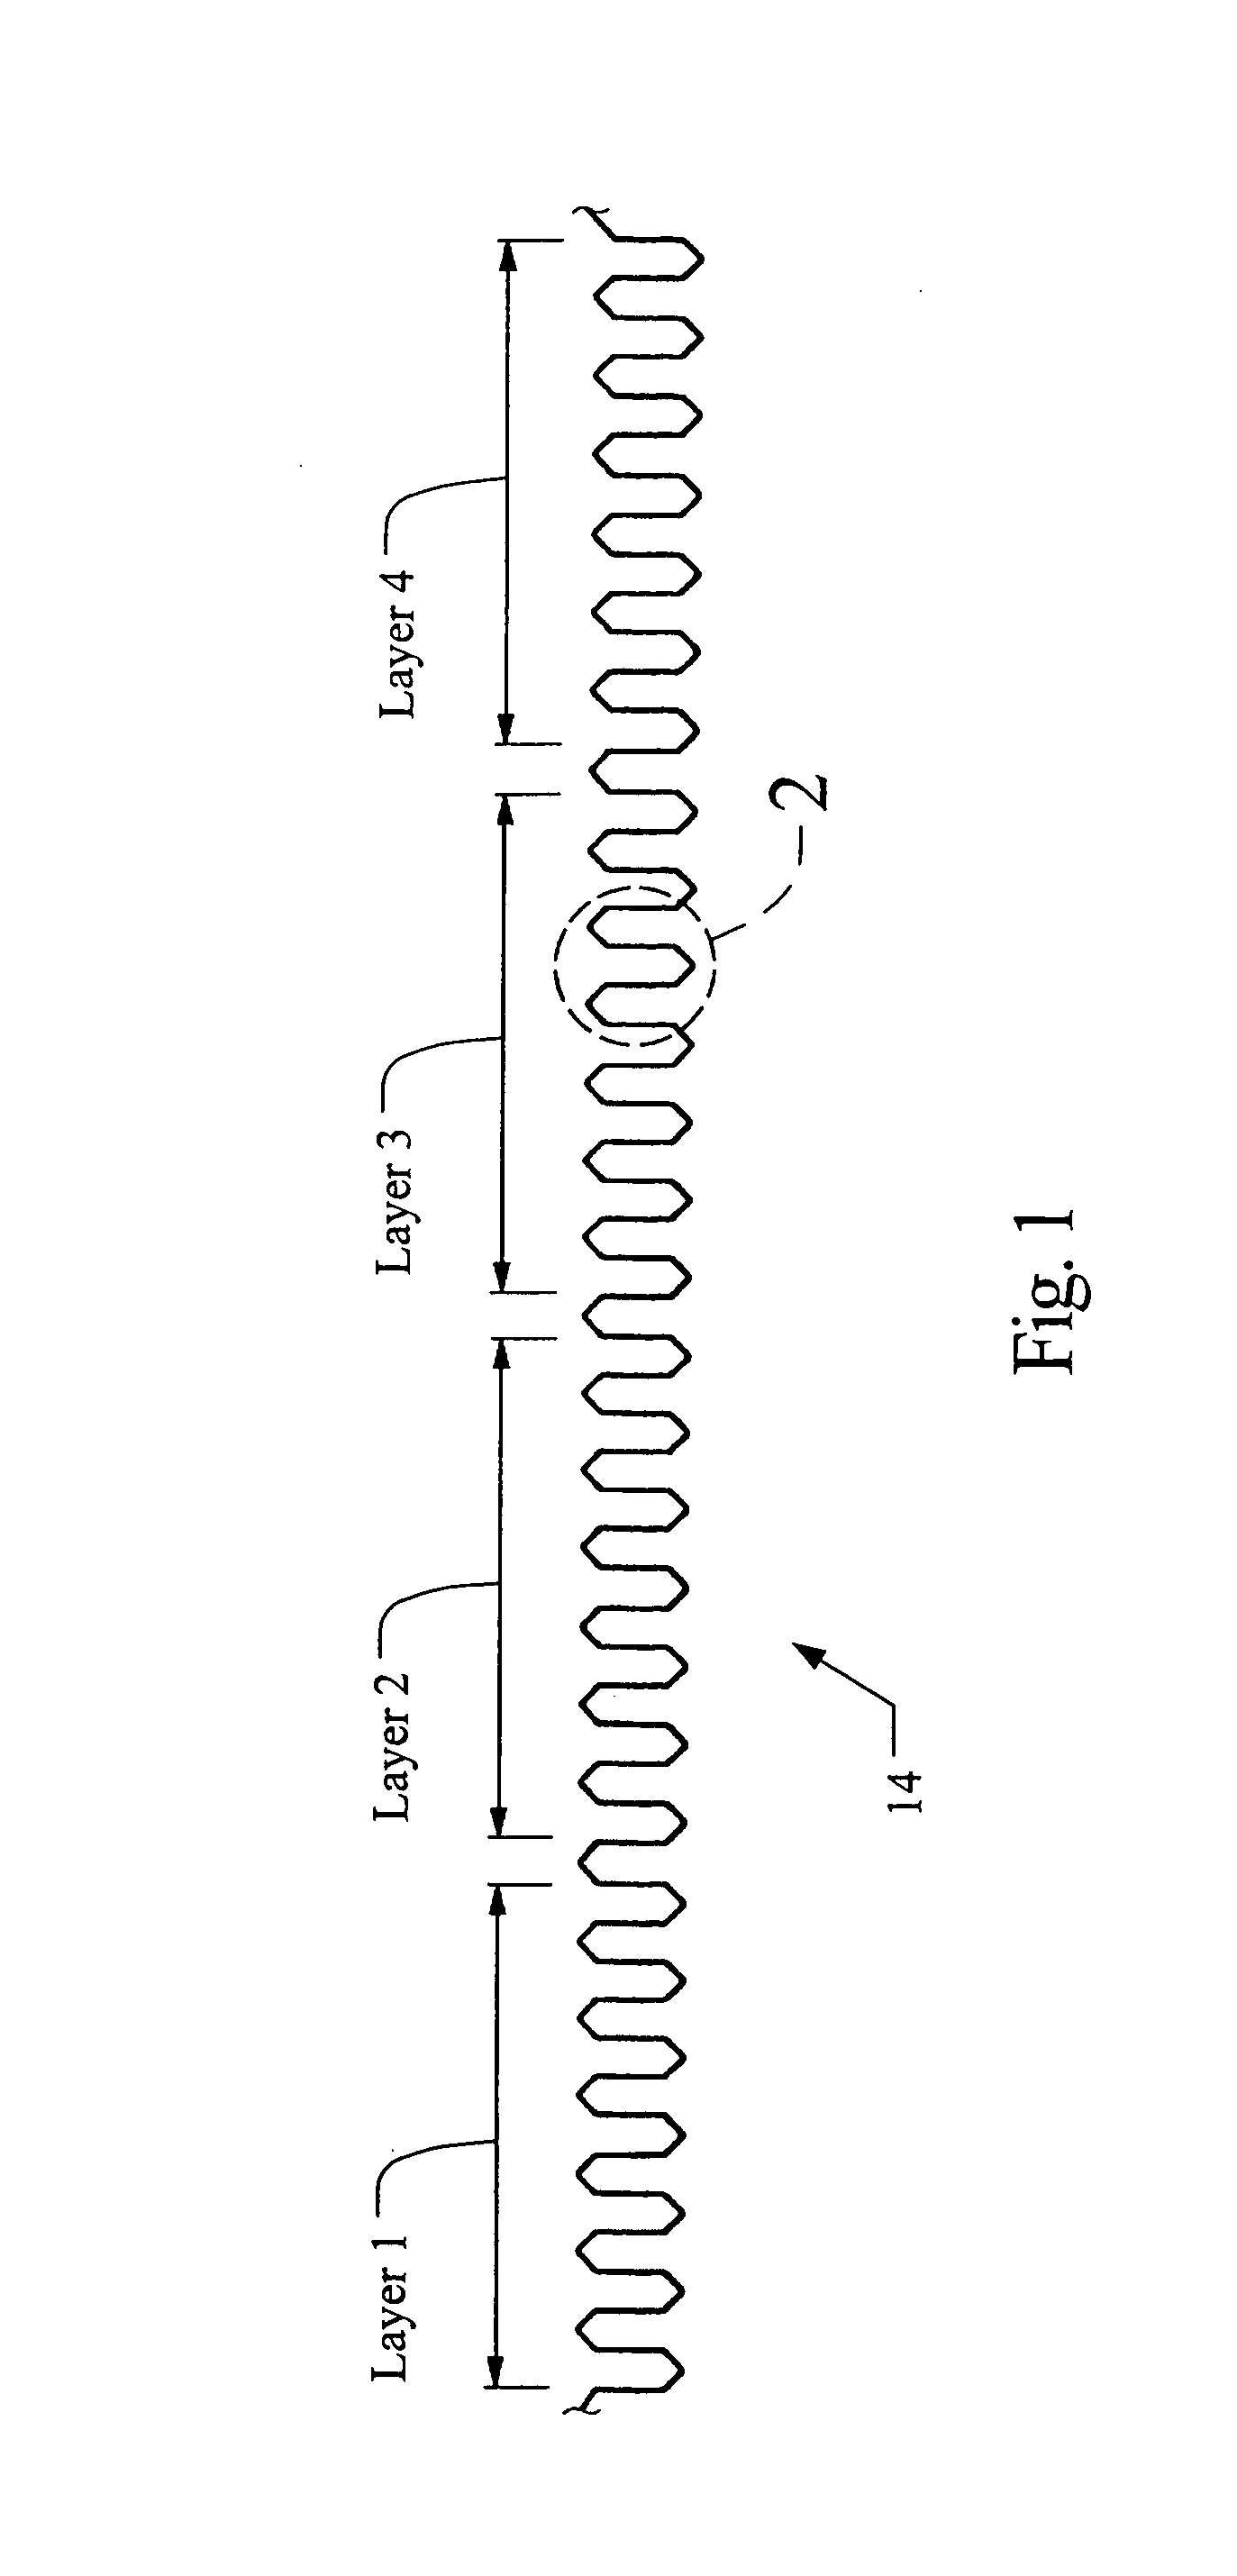 Method of forming cascaded stator winding